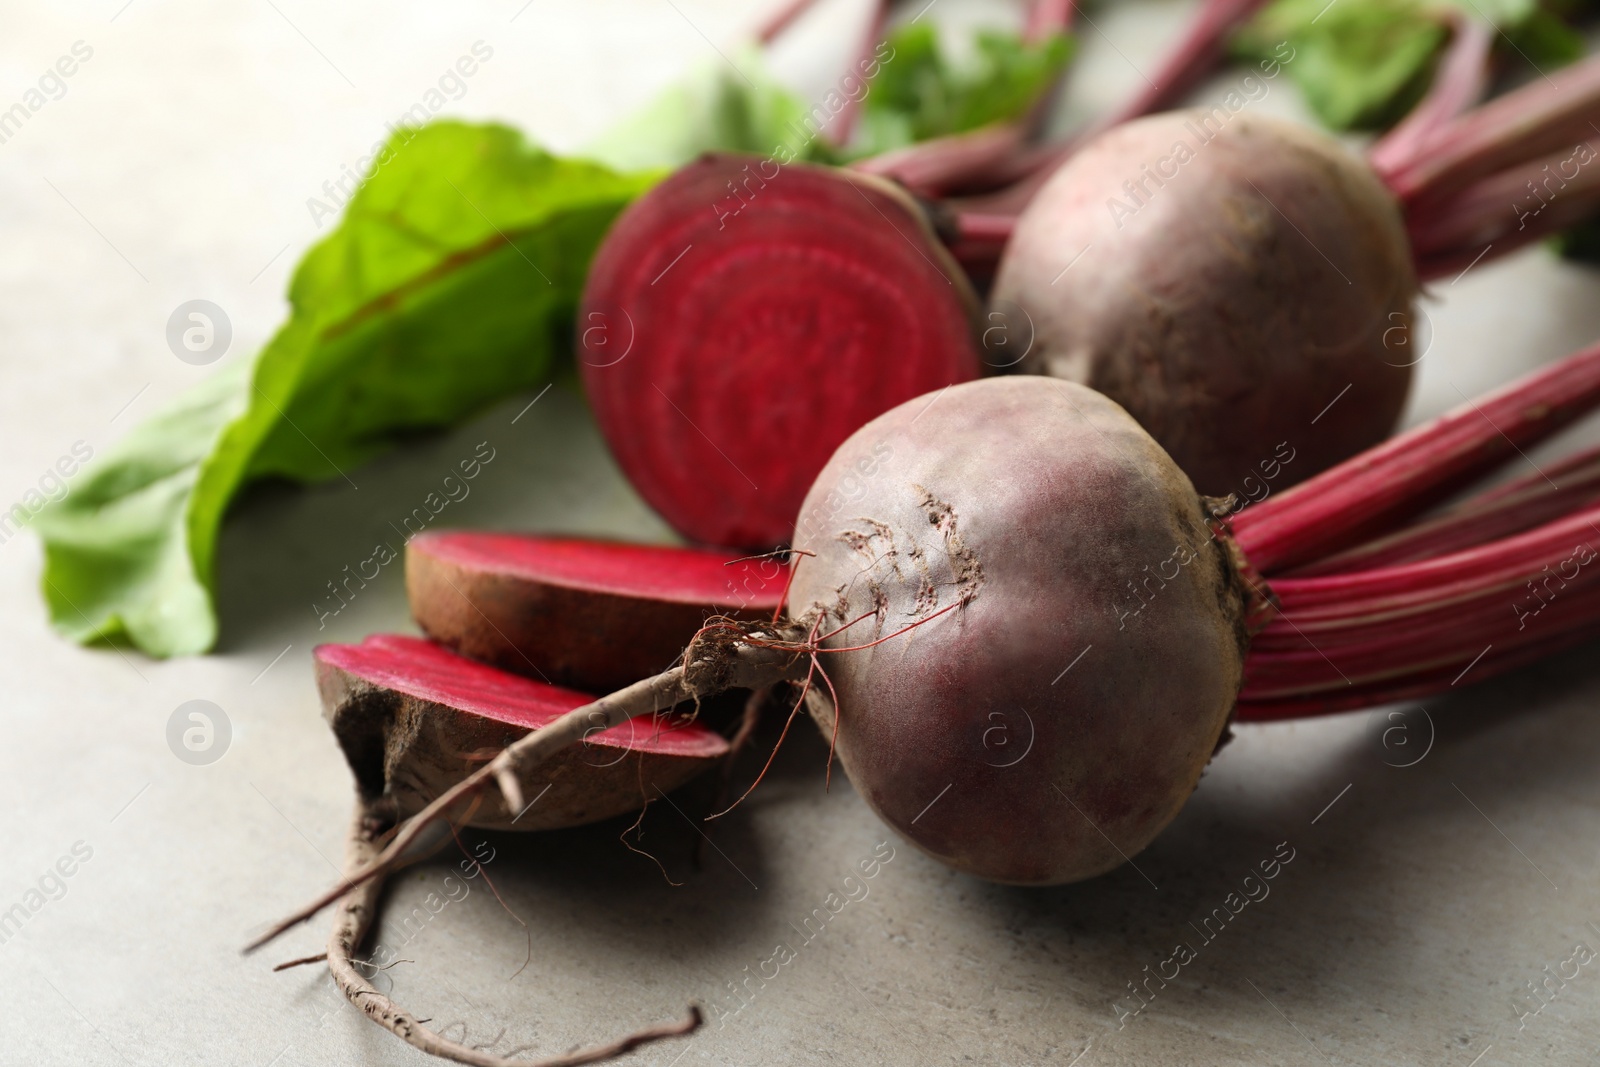 Photo of Cut and whole raw beets on light grey table, closeup